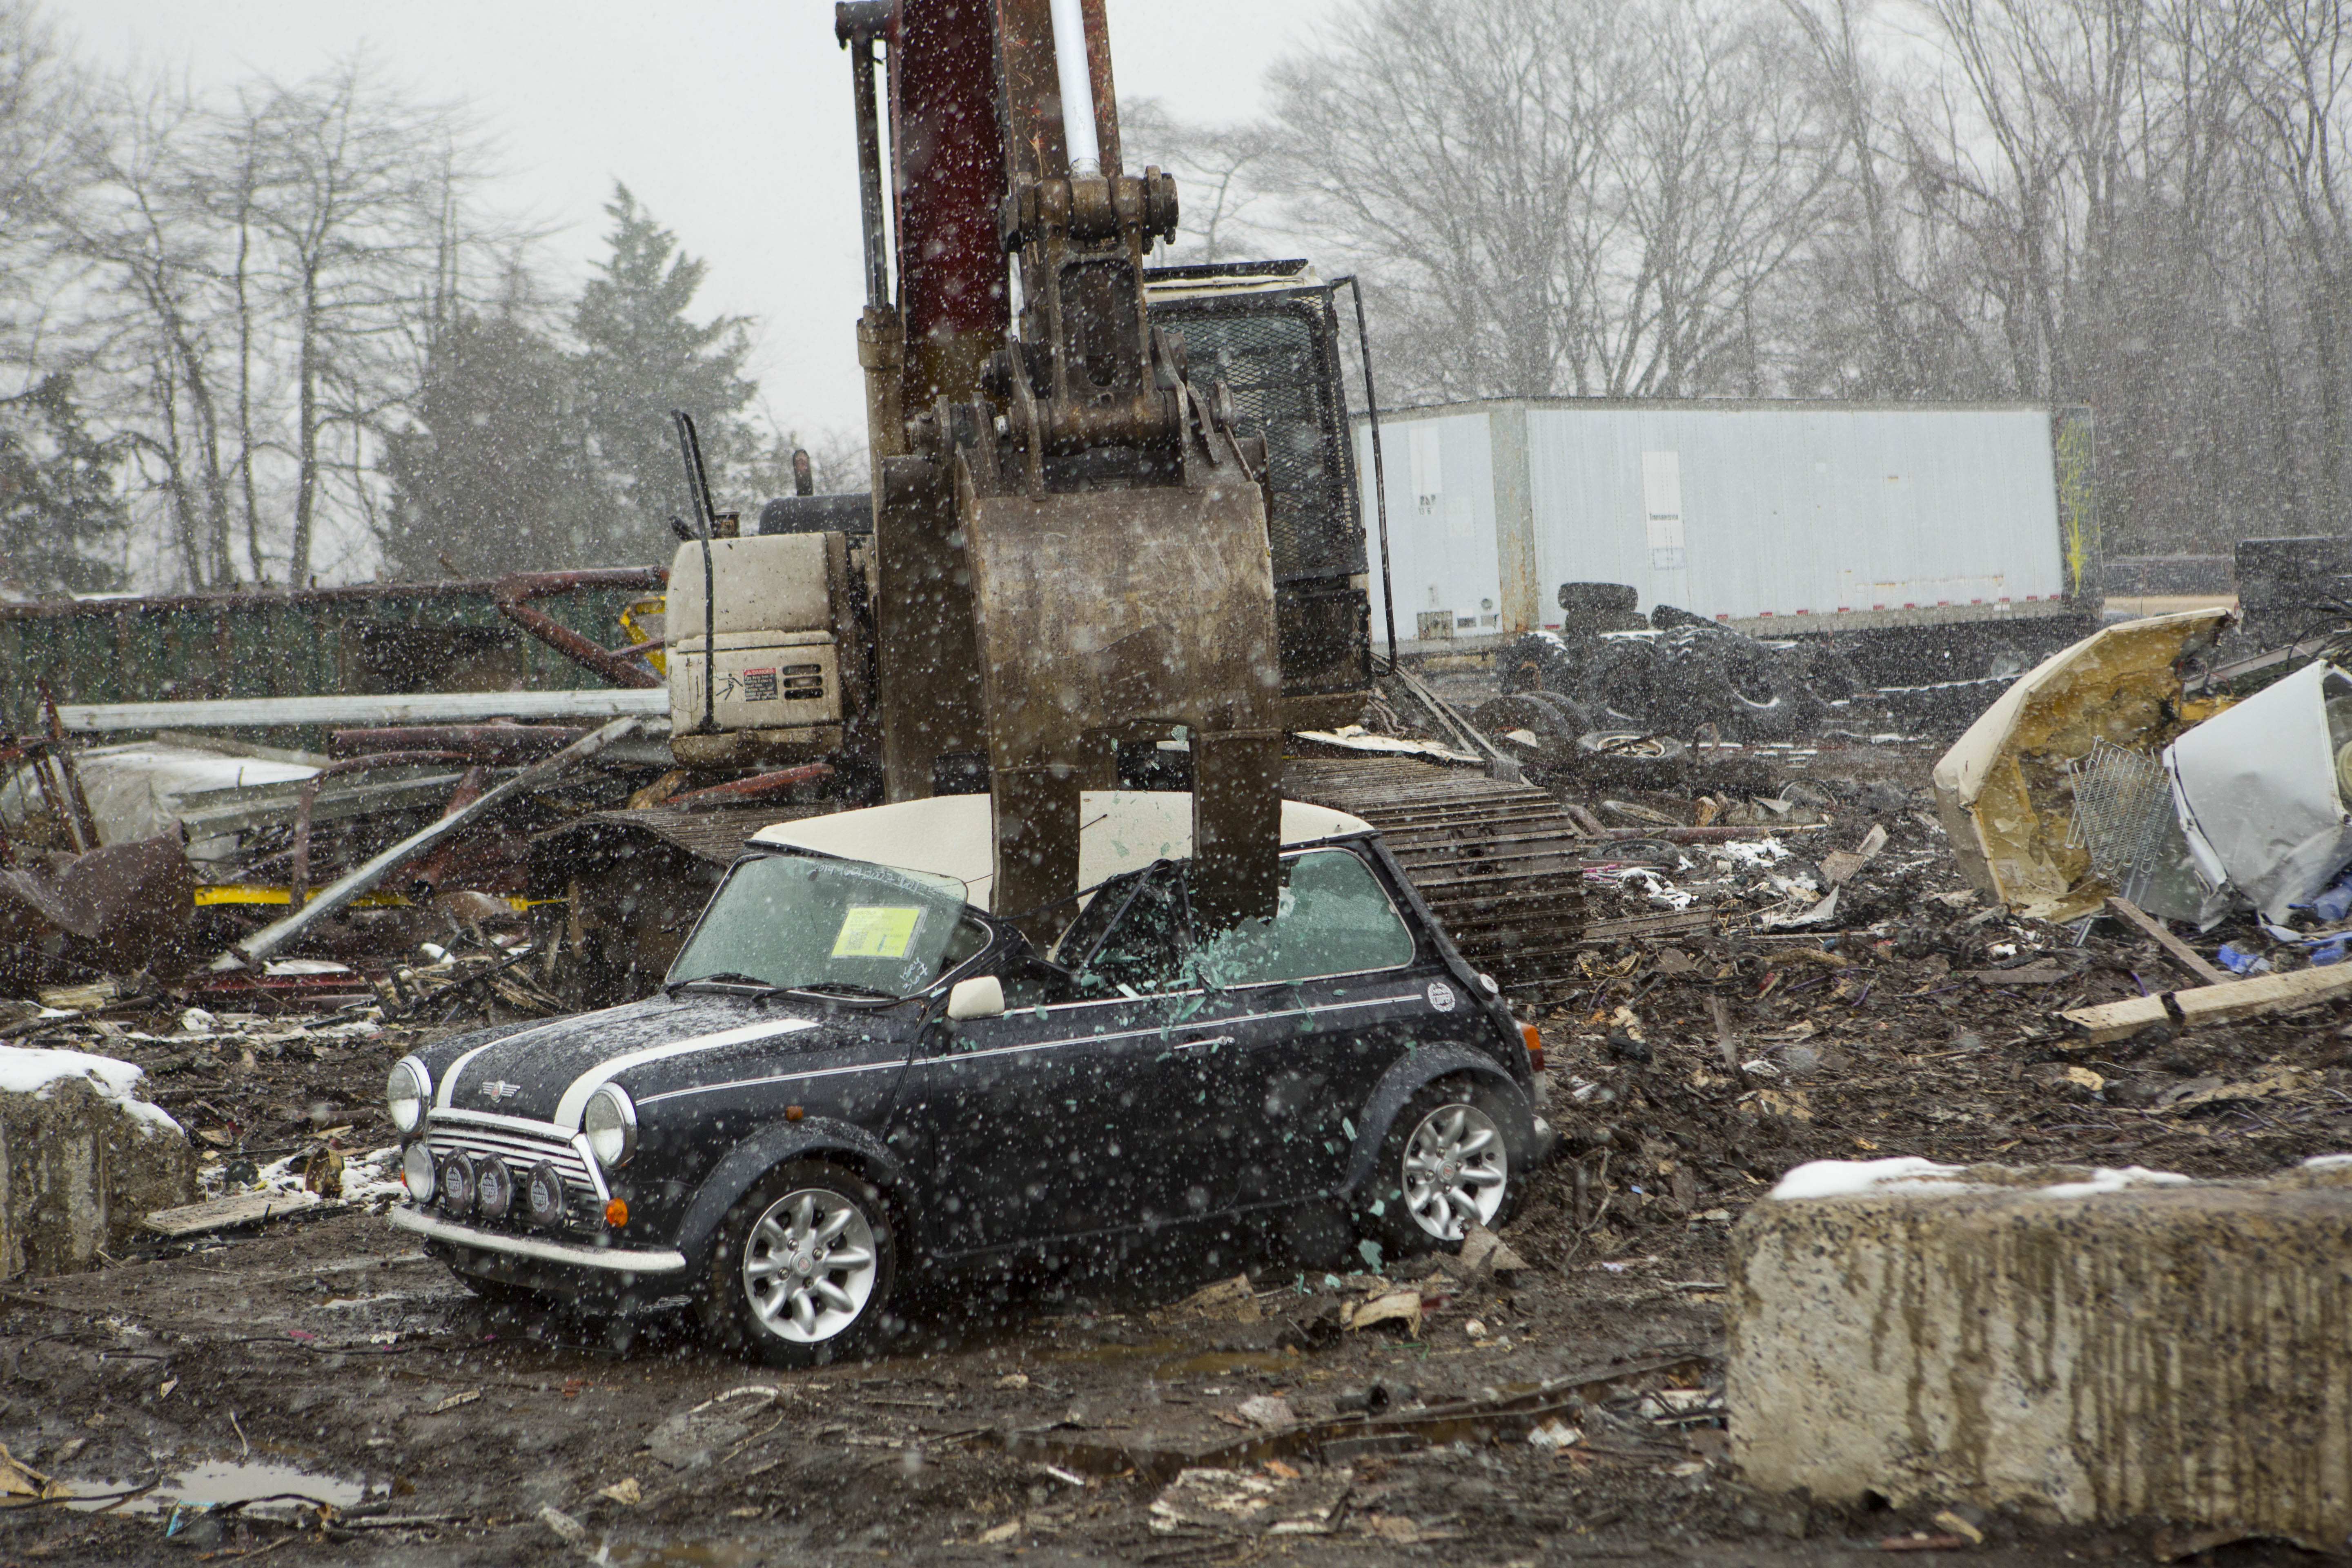 U.S. Customs and Border Protection in conjunction with British Authorities destroy a Mini Cooper that had many violations related to importation. Photo Credit: James Tourtellotte.